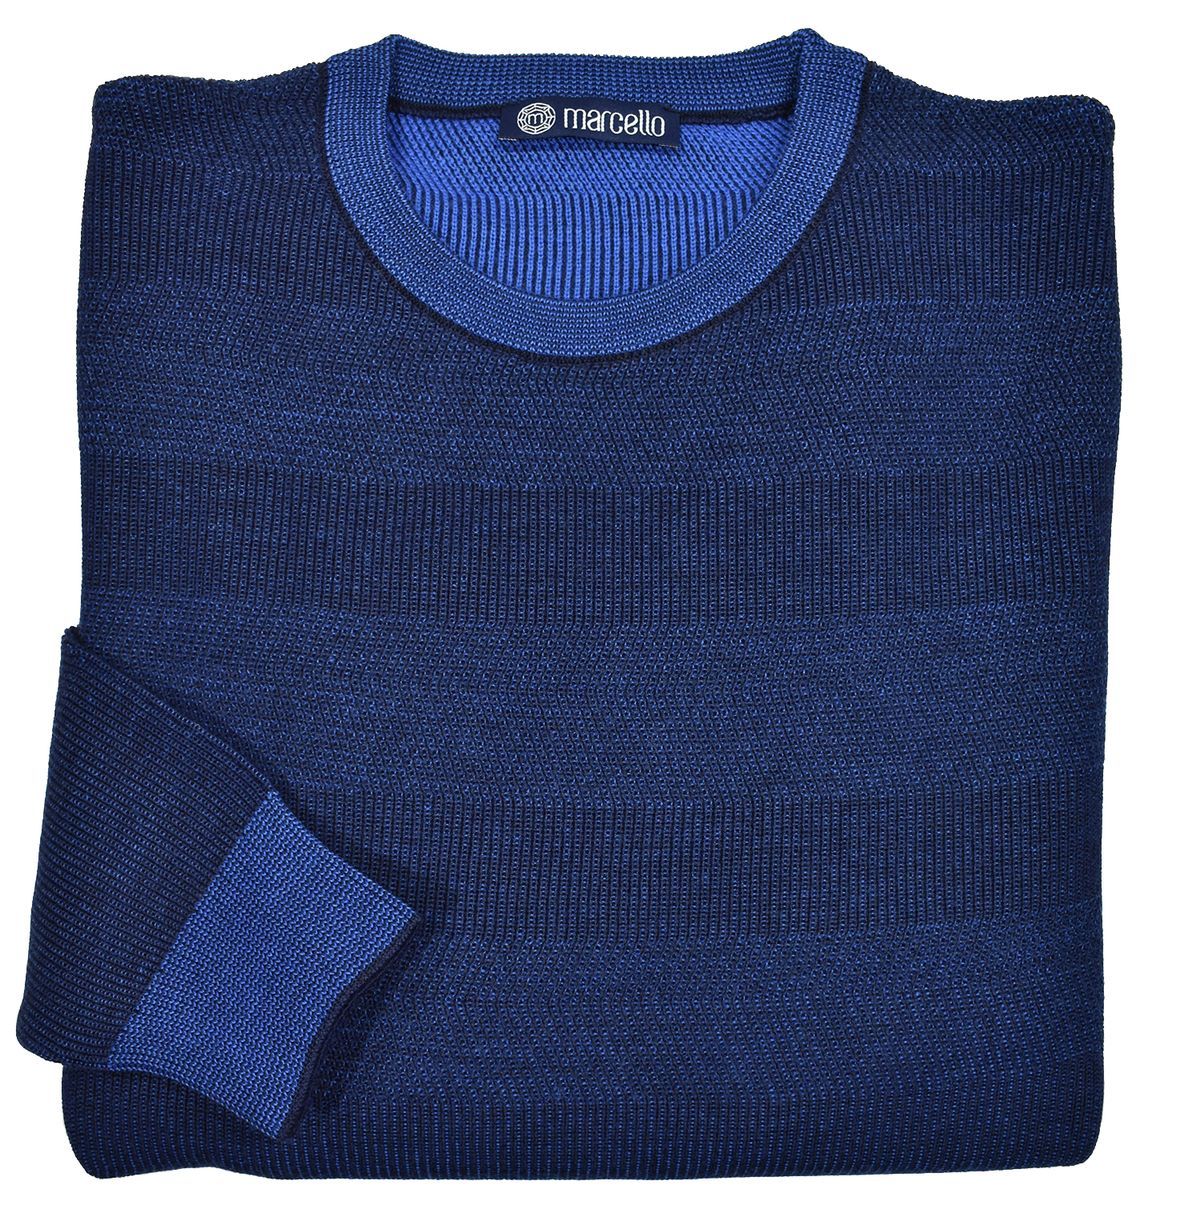 Marcello knit sweater featuring a soft, Italian merino wool blend that has a soft hand feel and a rich blue and navy color combination. The fine accent of black throughout adds dimension and sophistication. Excellent, updated traditional style works effortlessly in any setting. Classic fit, classic ribbed cuffs and waistband.  By Marcello Sport